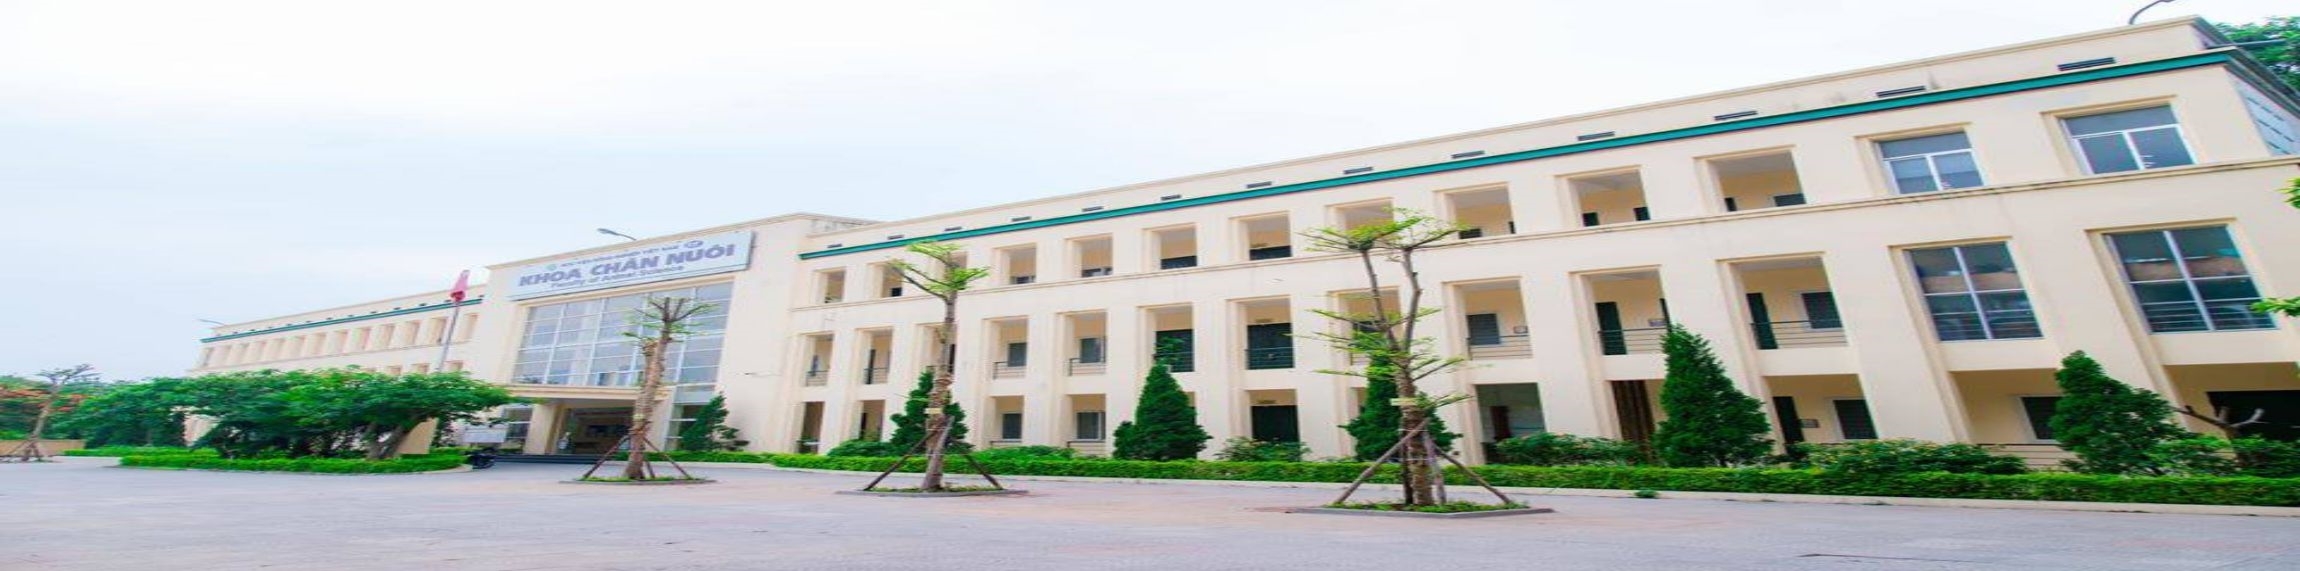 Faculty of Animal Science